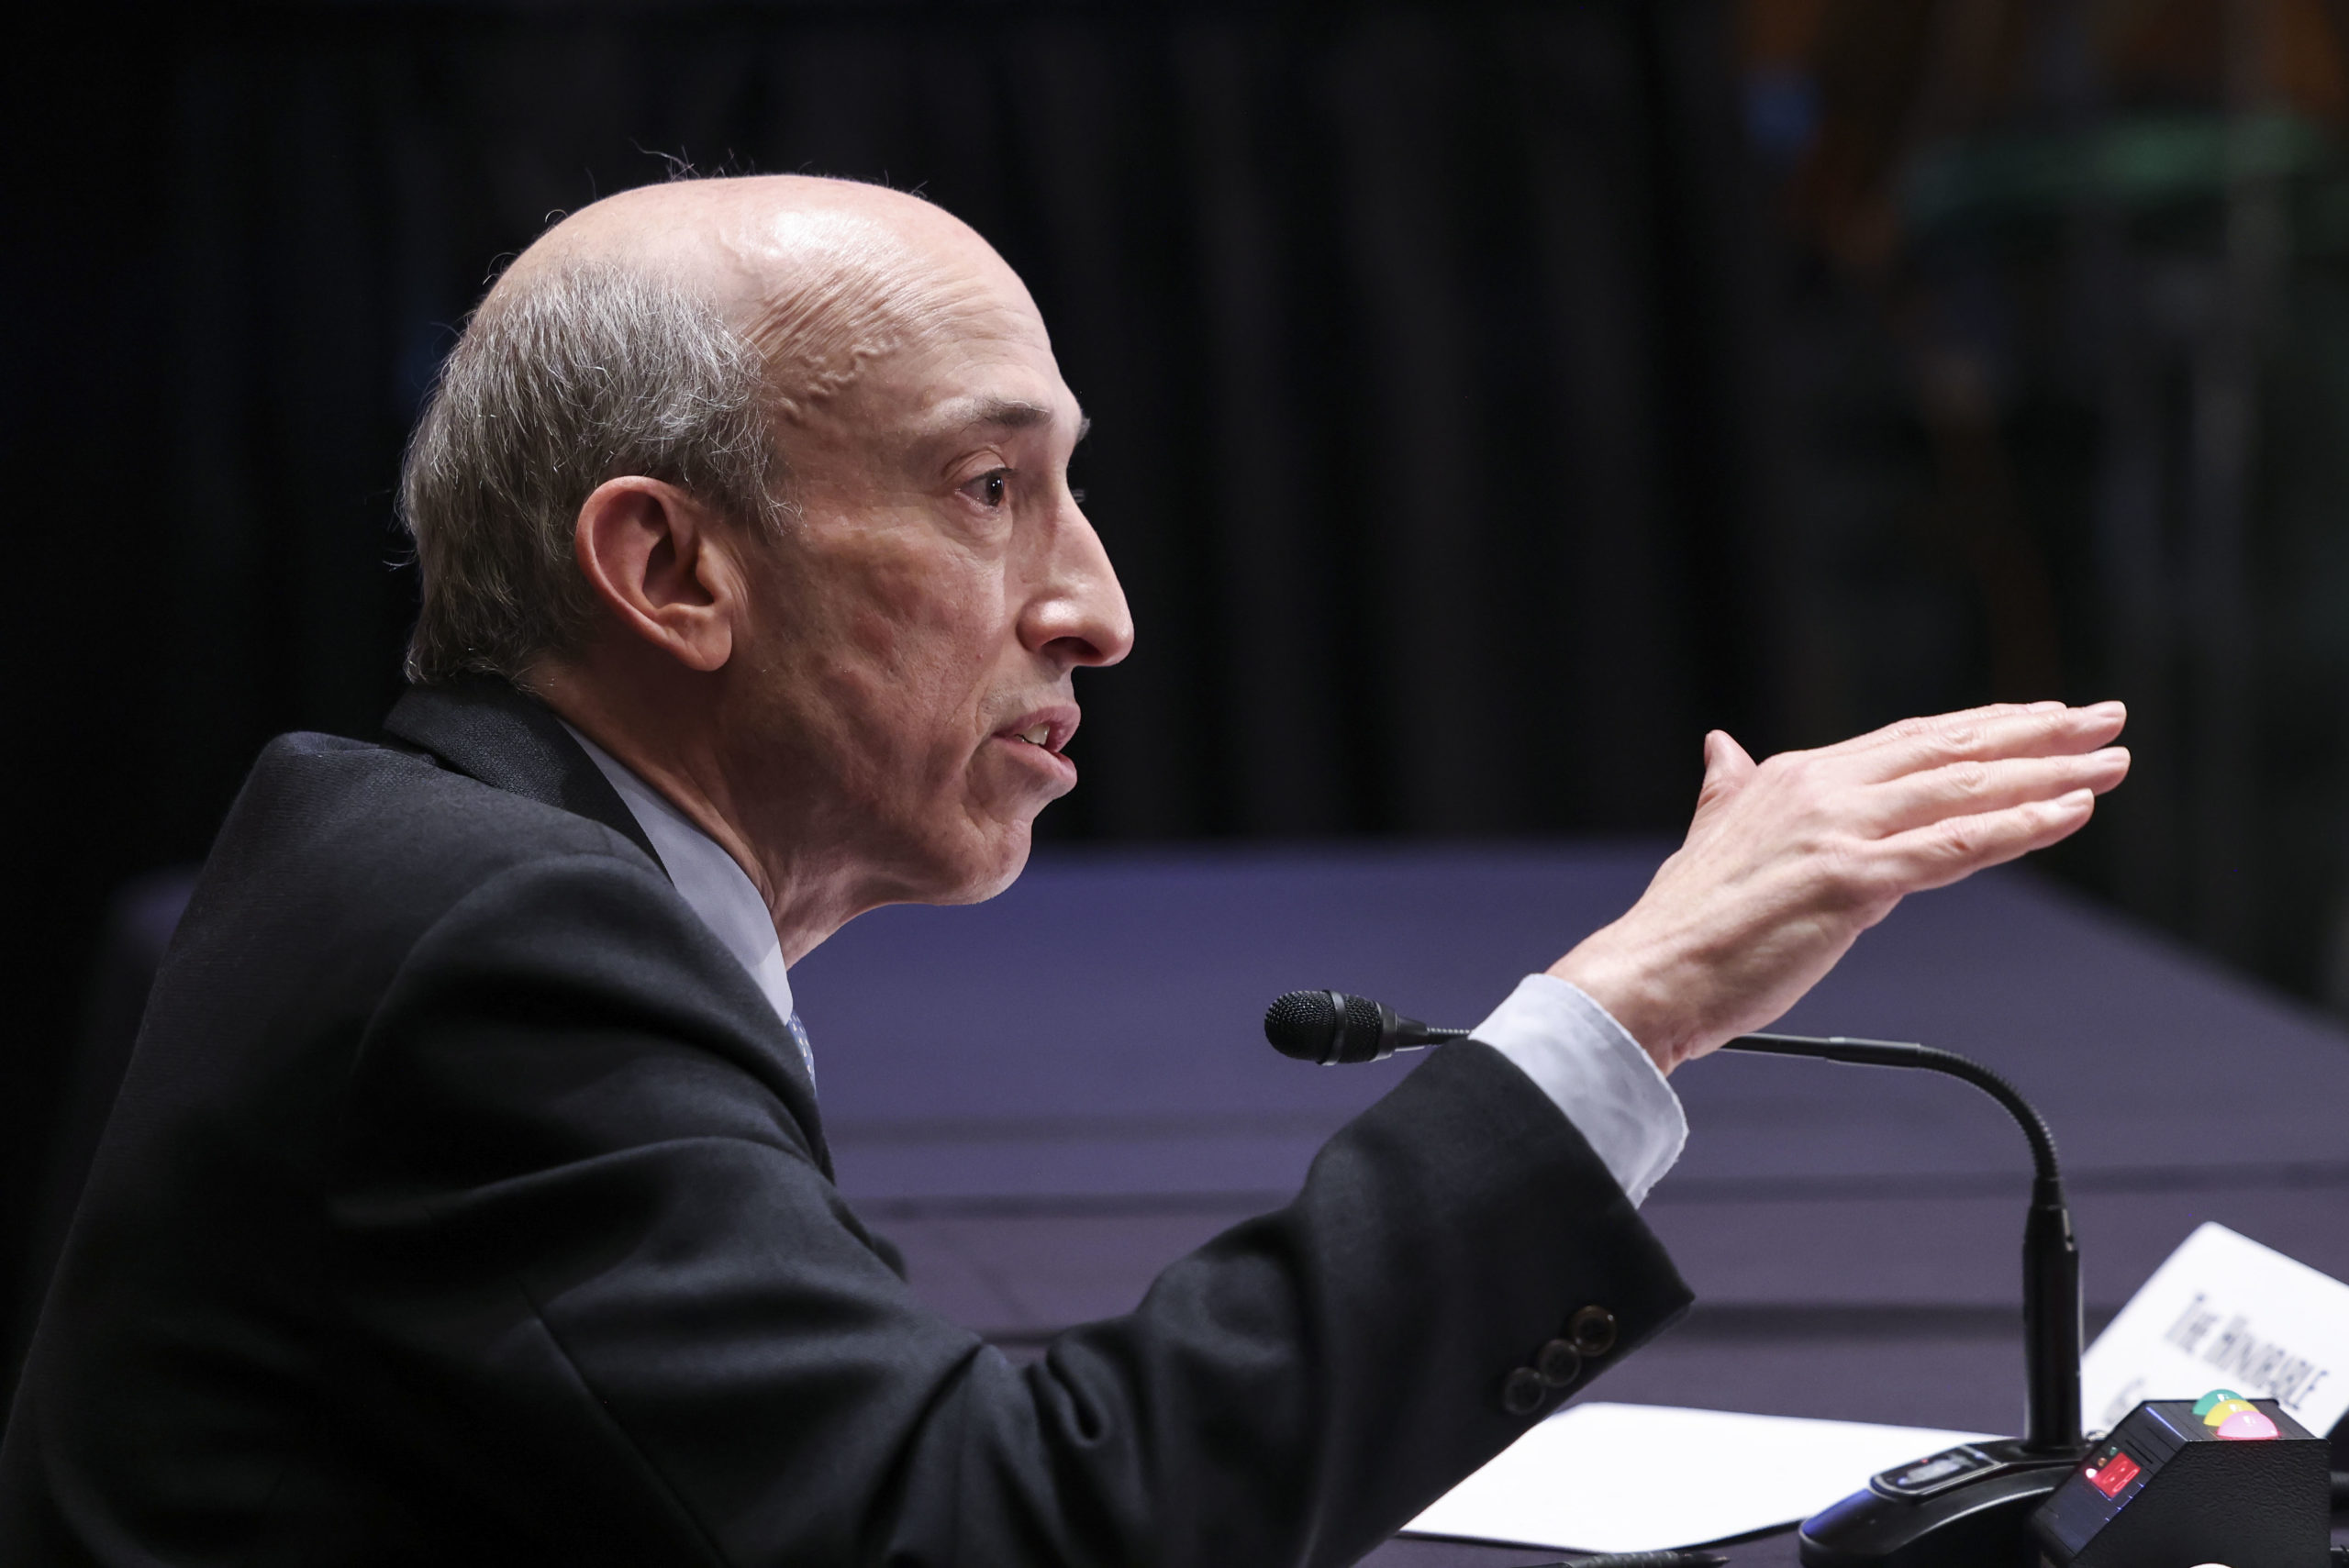 Gary Gensler, chair of the Securities and Exchange Commission, testifies during a Senate Banking Committee hearing on Sept. 14. (Evelyn Hockstein/Pool/Getty Images)